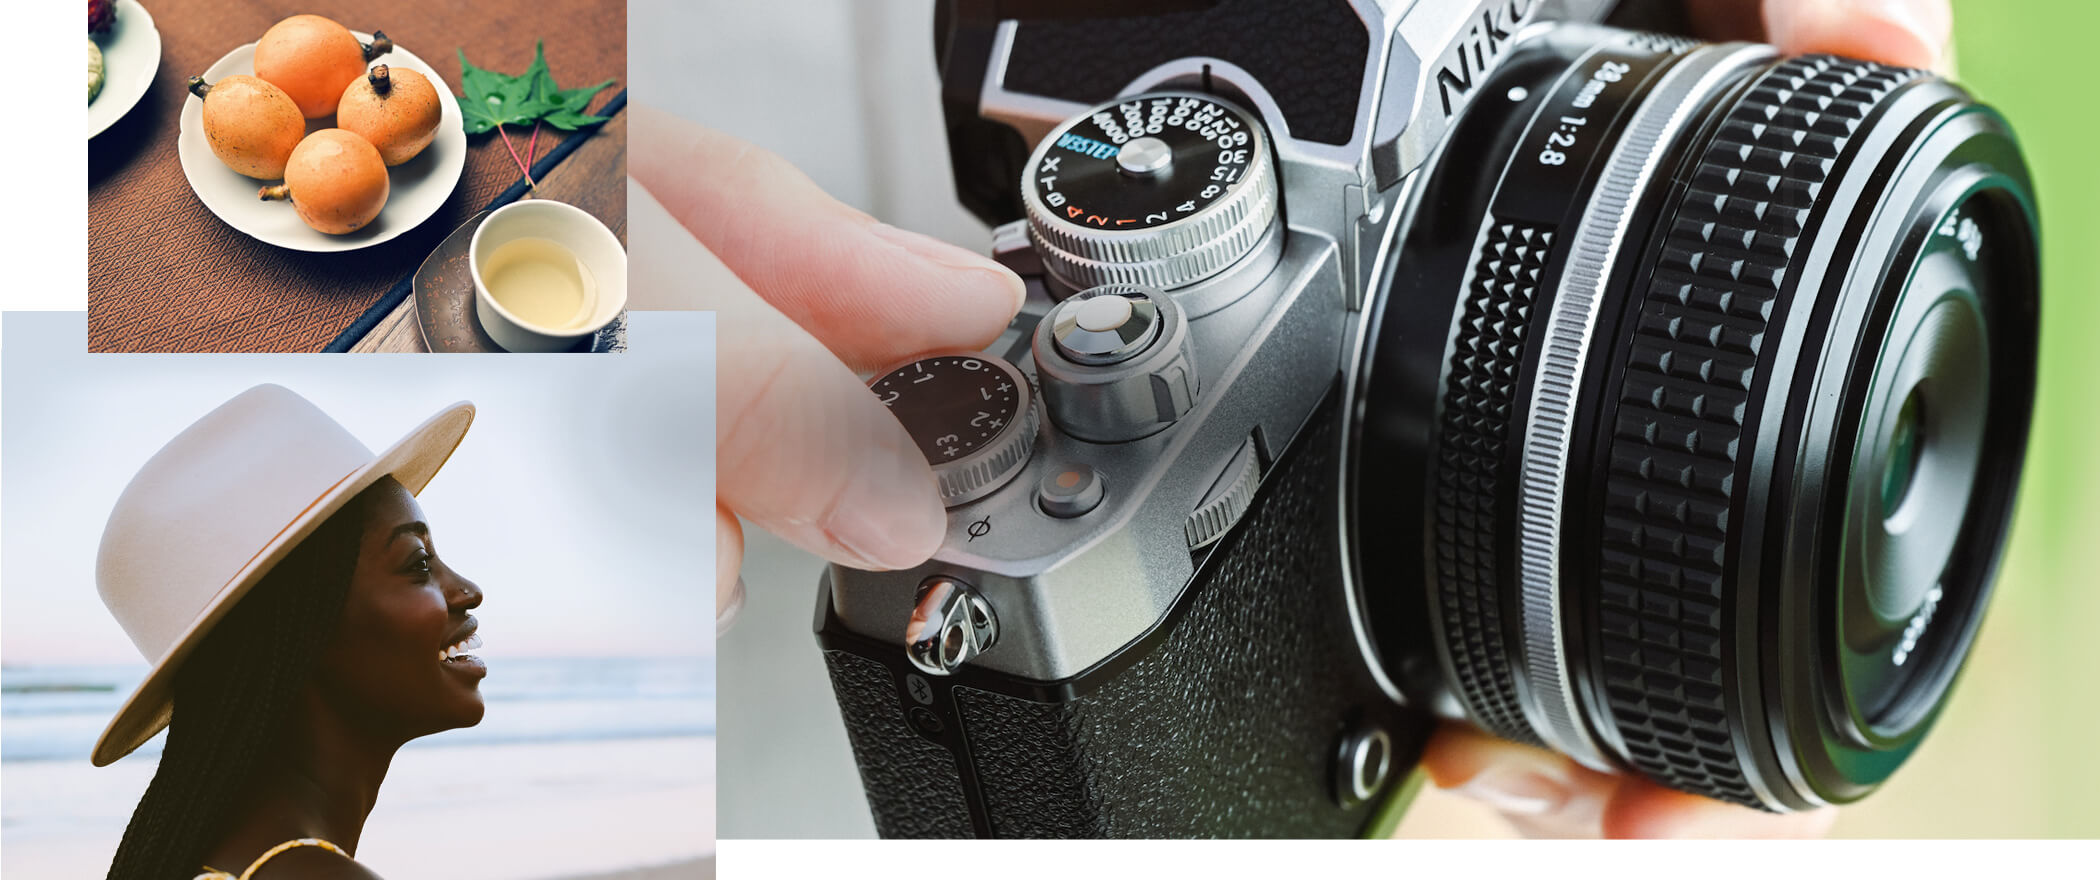 Collage of photos taken with the NIKKOR Z 28mm f/2.8 (ES) lens and of the Z fc and lens in a person's hand